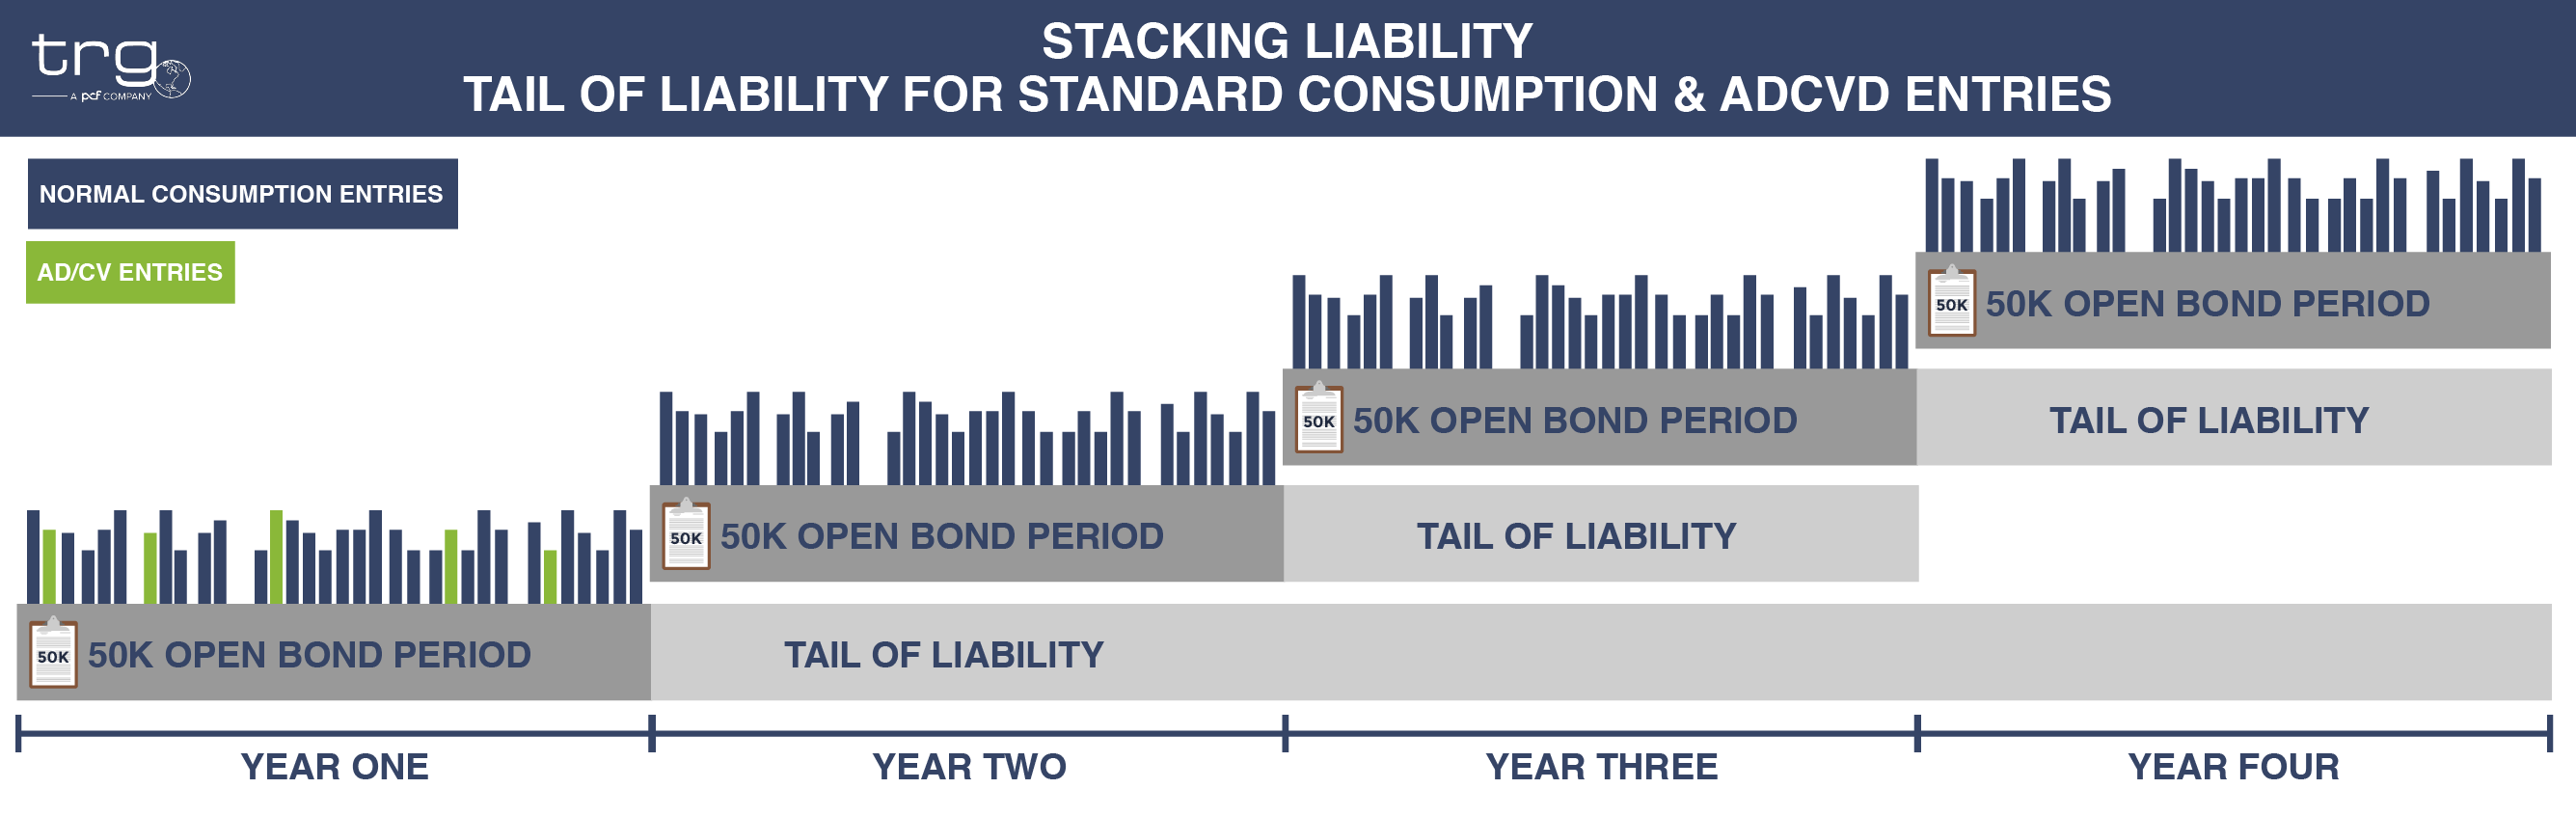 A graphic showing the tailing of liability when an importer makes standard consumption and antidumping entries into the United States and how that impacts the stacking liability on your Customs Bond.